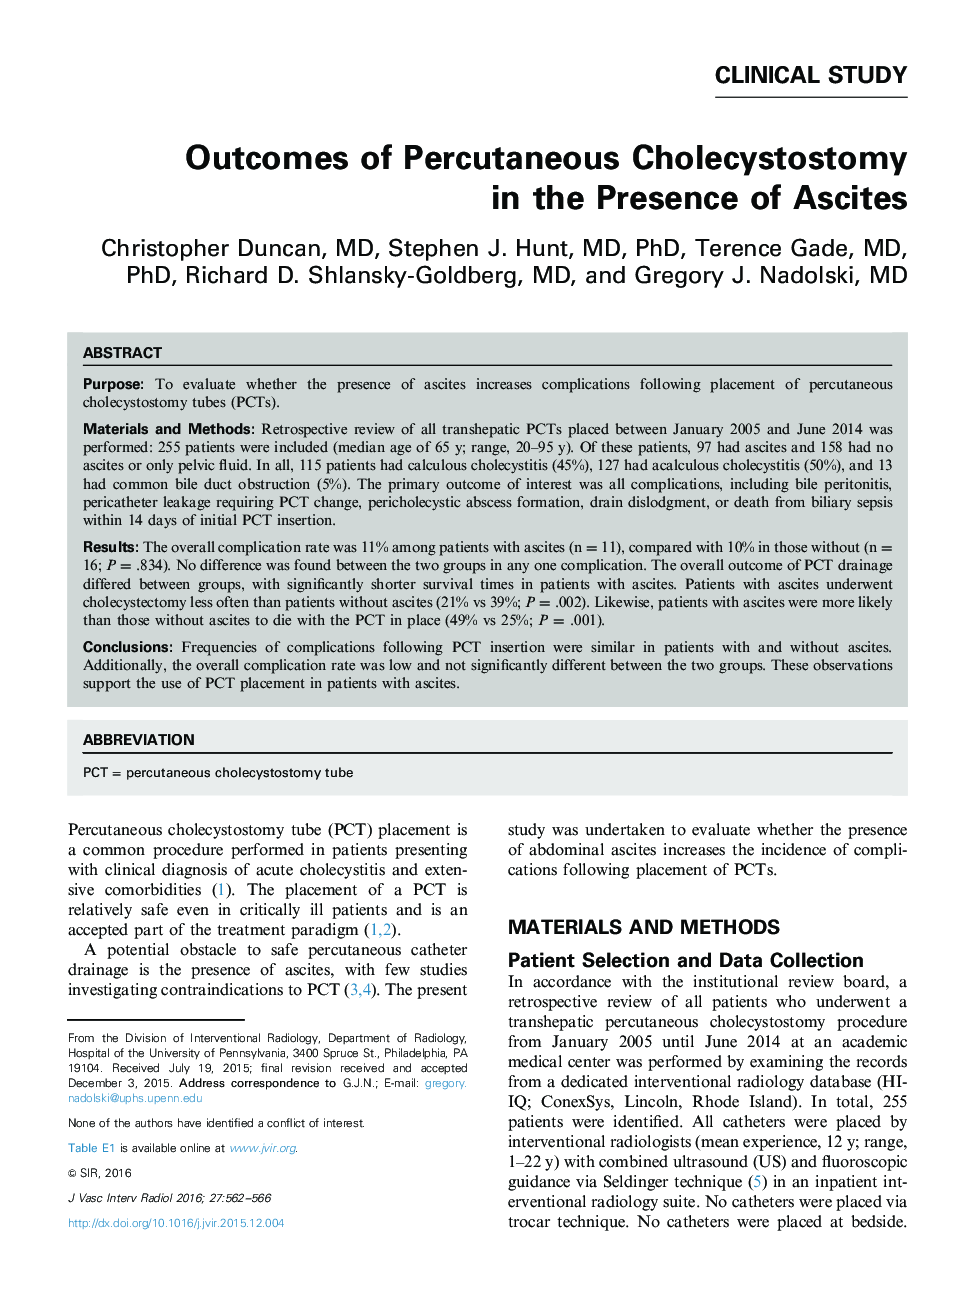 Outcomes of Percutaneous Cholecystostomy in the Presence of Ascites